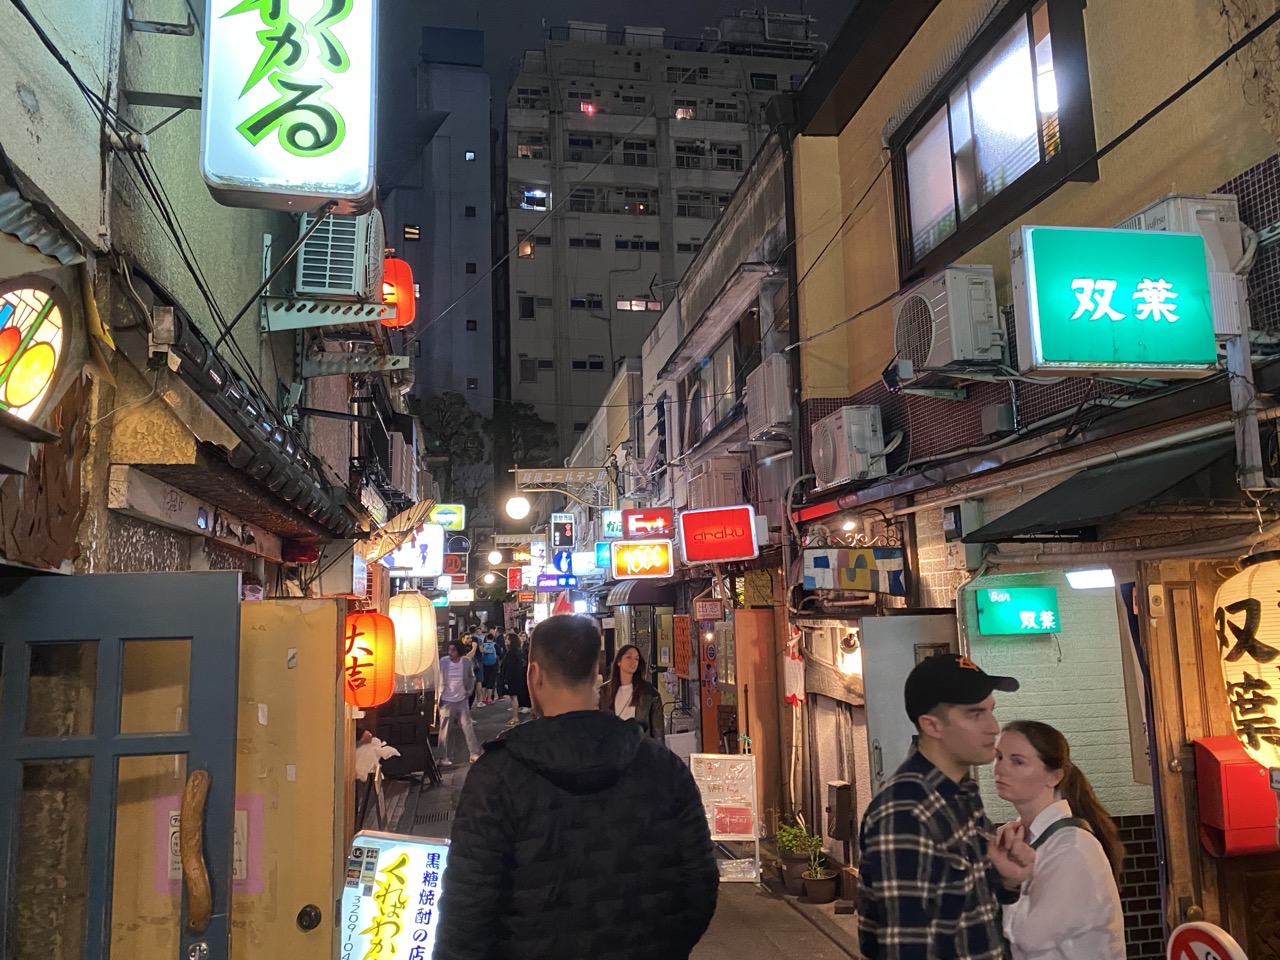 Many tiny pubs in the Golden Gai